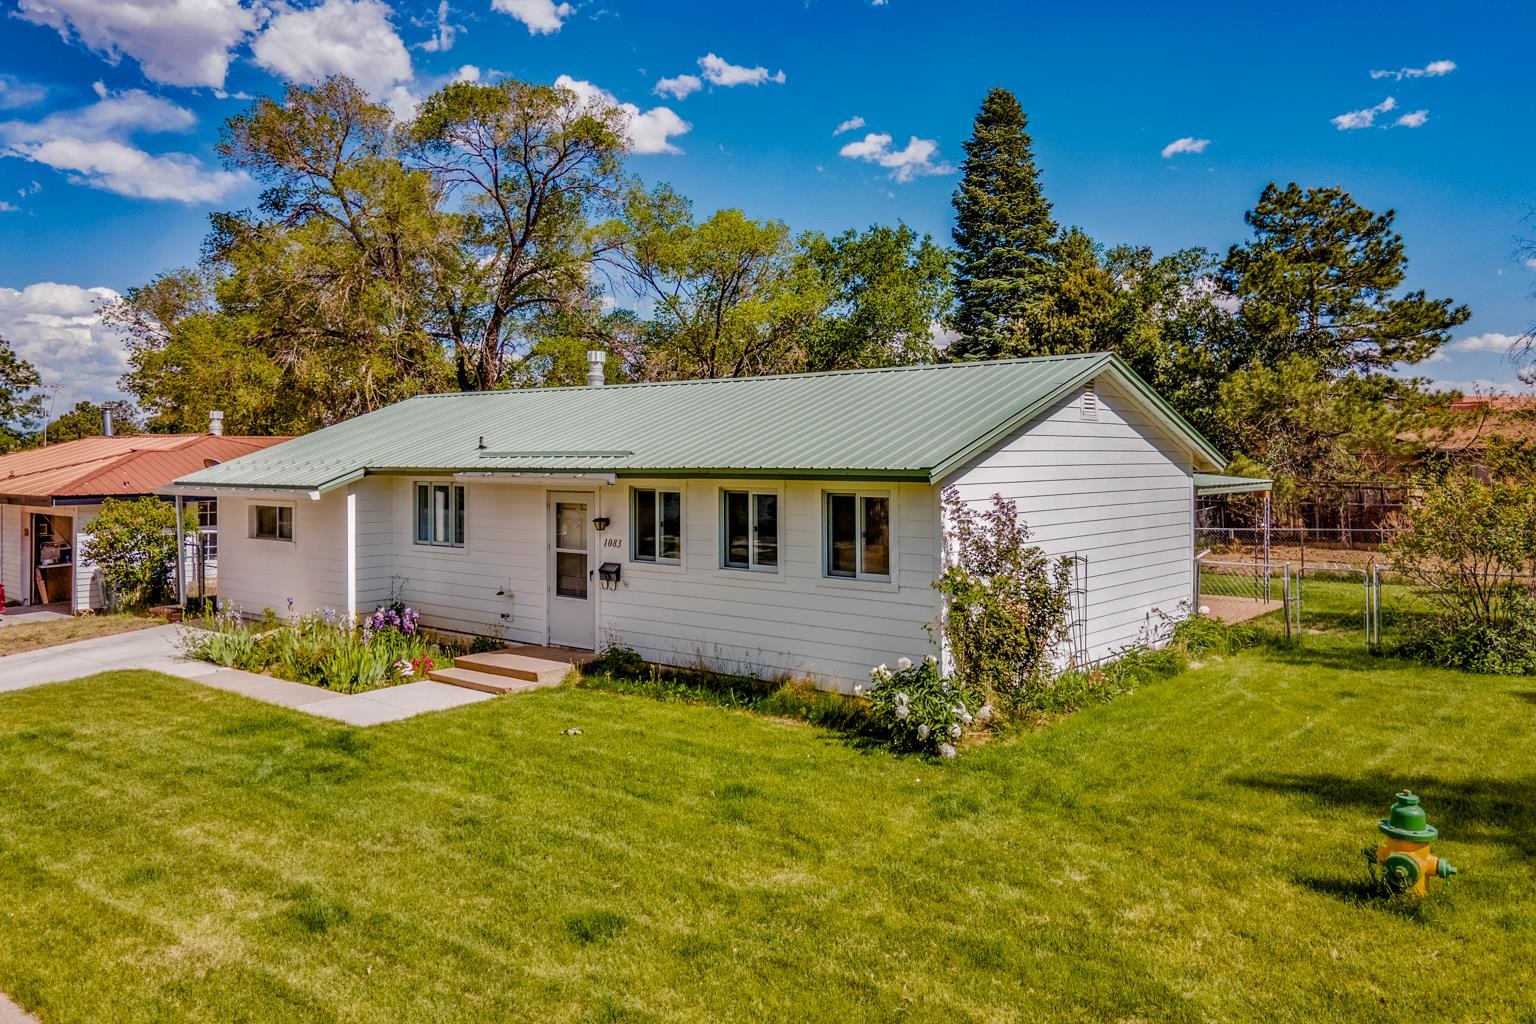 1083 OPAL, Los Alamos, New Mexico 87544, 2 Bedrooms Bedrooms, ,1 BathroomBathrooms,Residential,For Sale,1083 OPAL,202202101